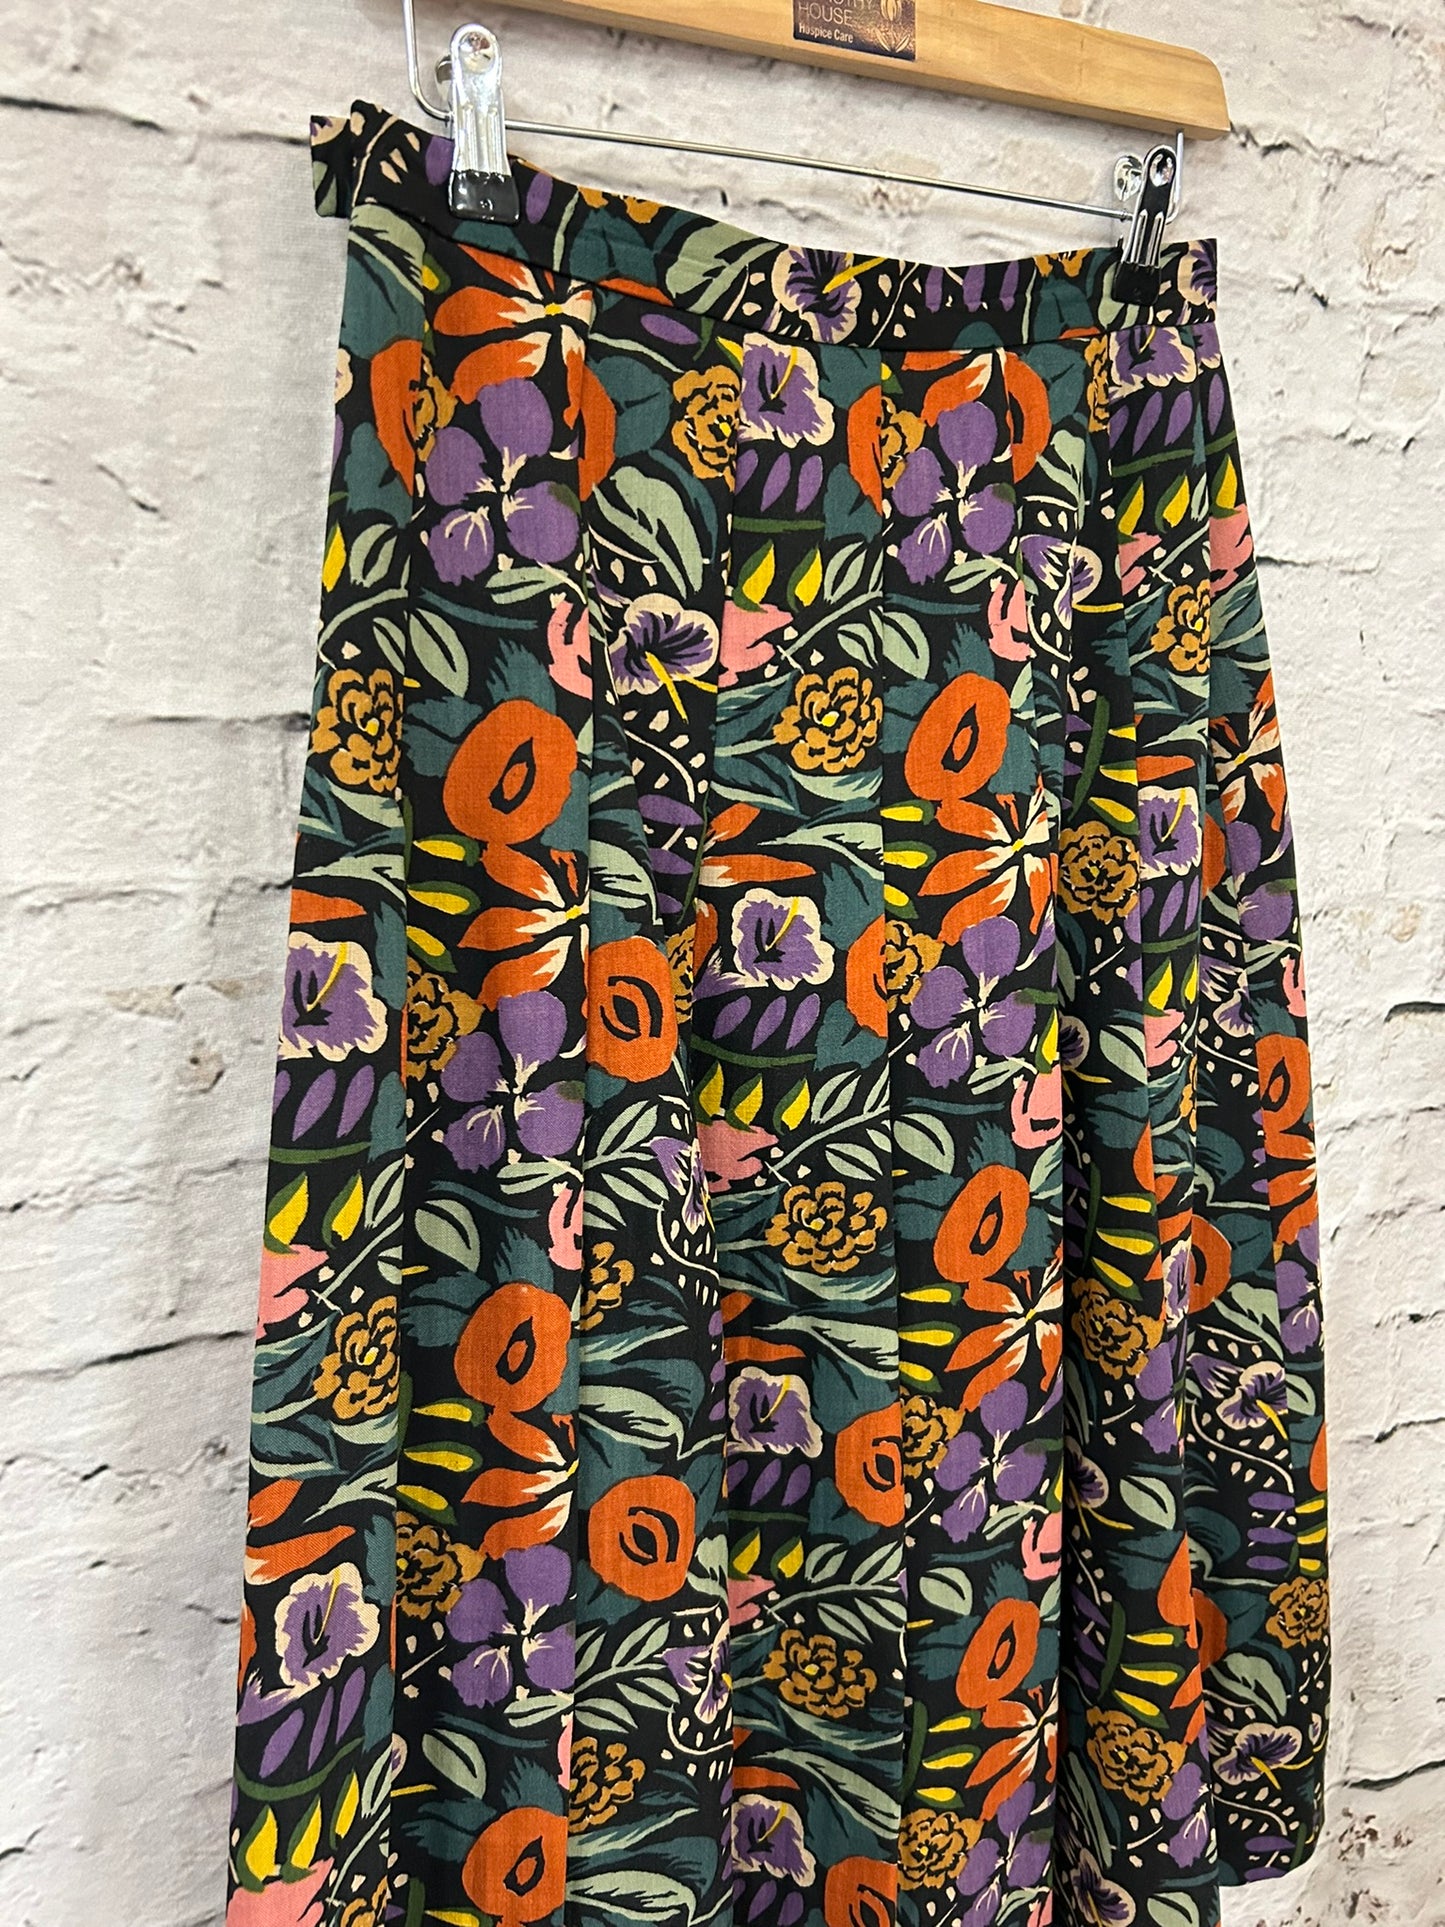 1980s Style Black Floral Pleated Midi Skirt Size 10-12